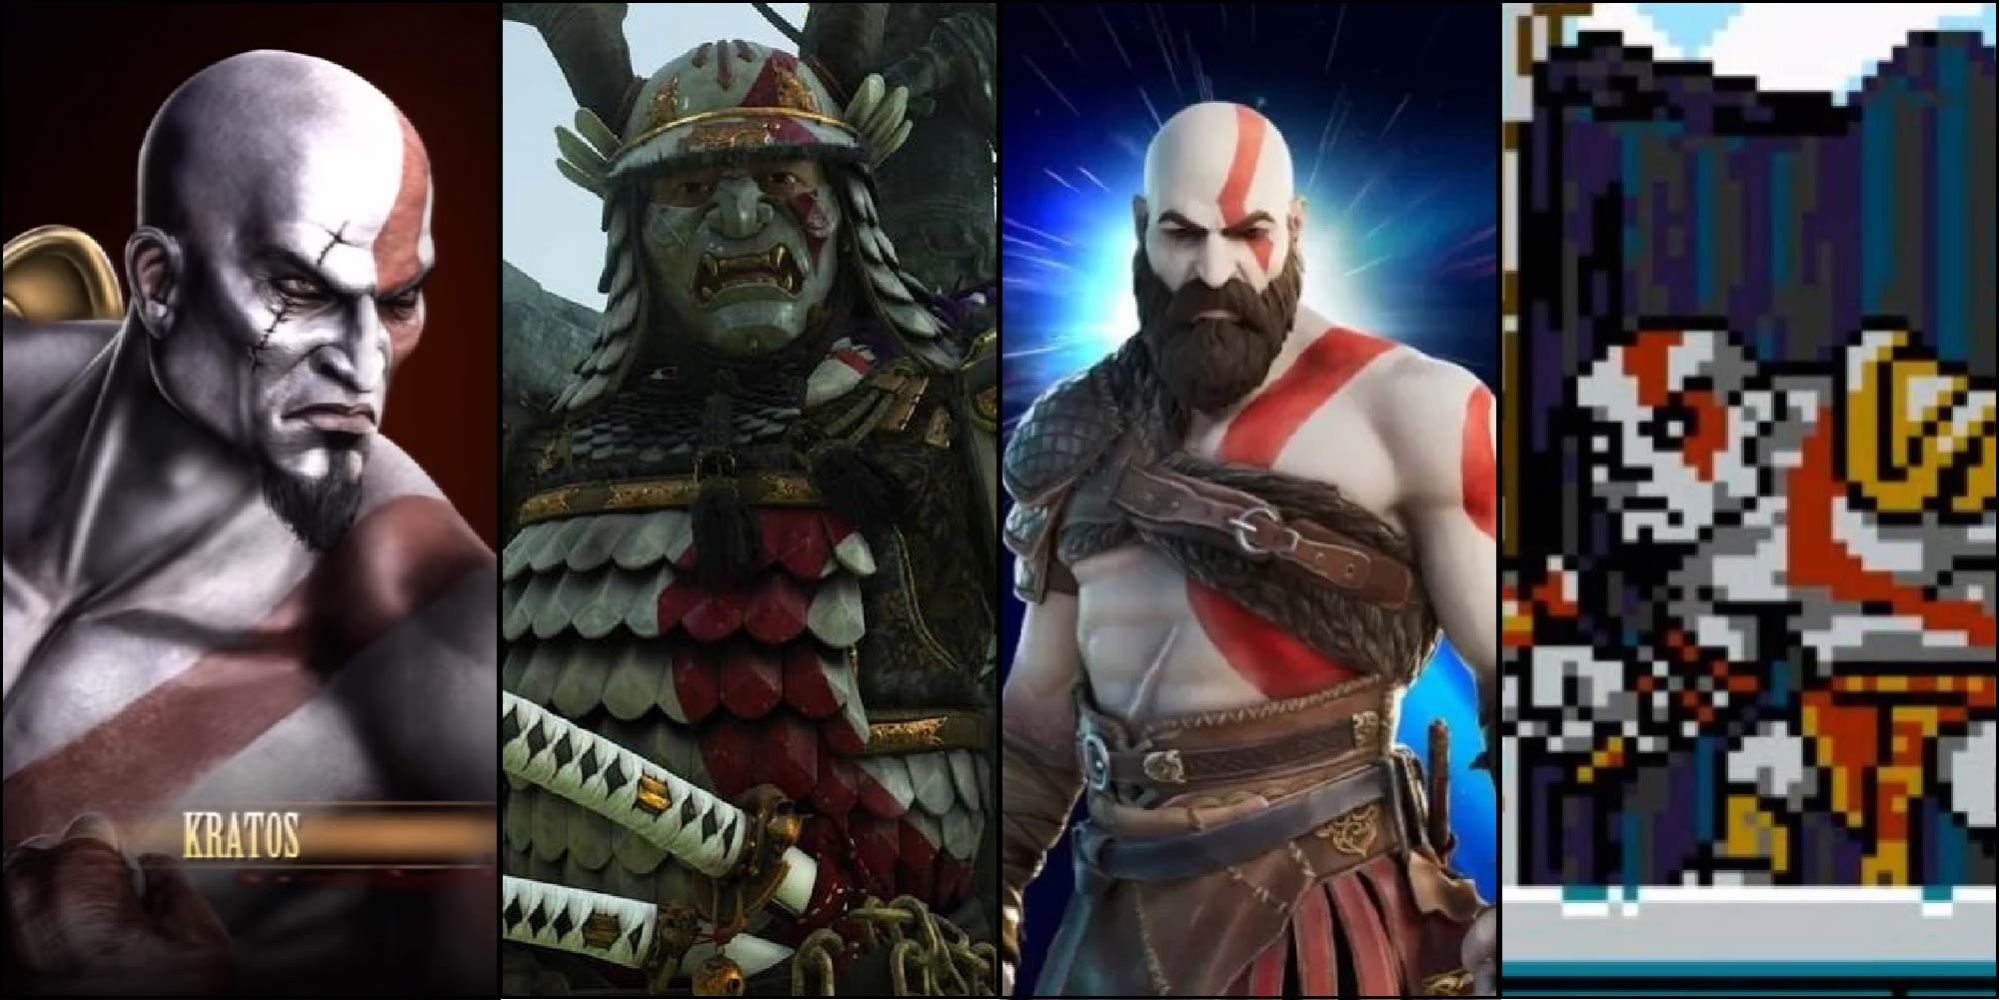 Kratos, from God or War, being referenced and appearing in other games